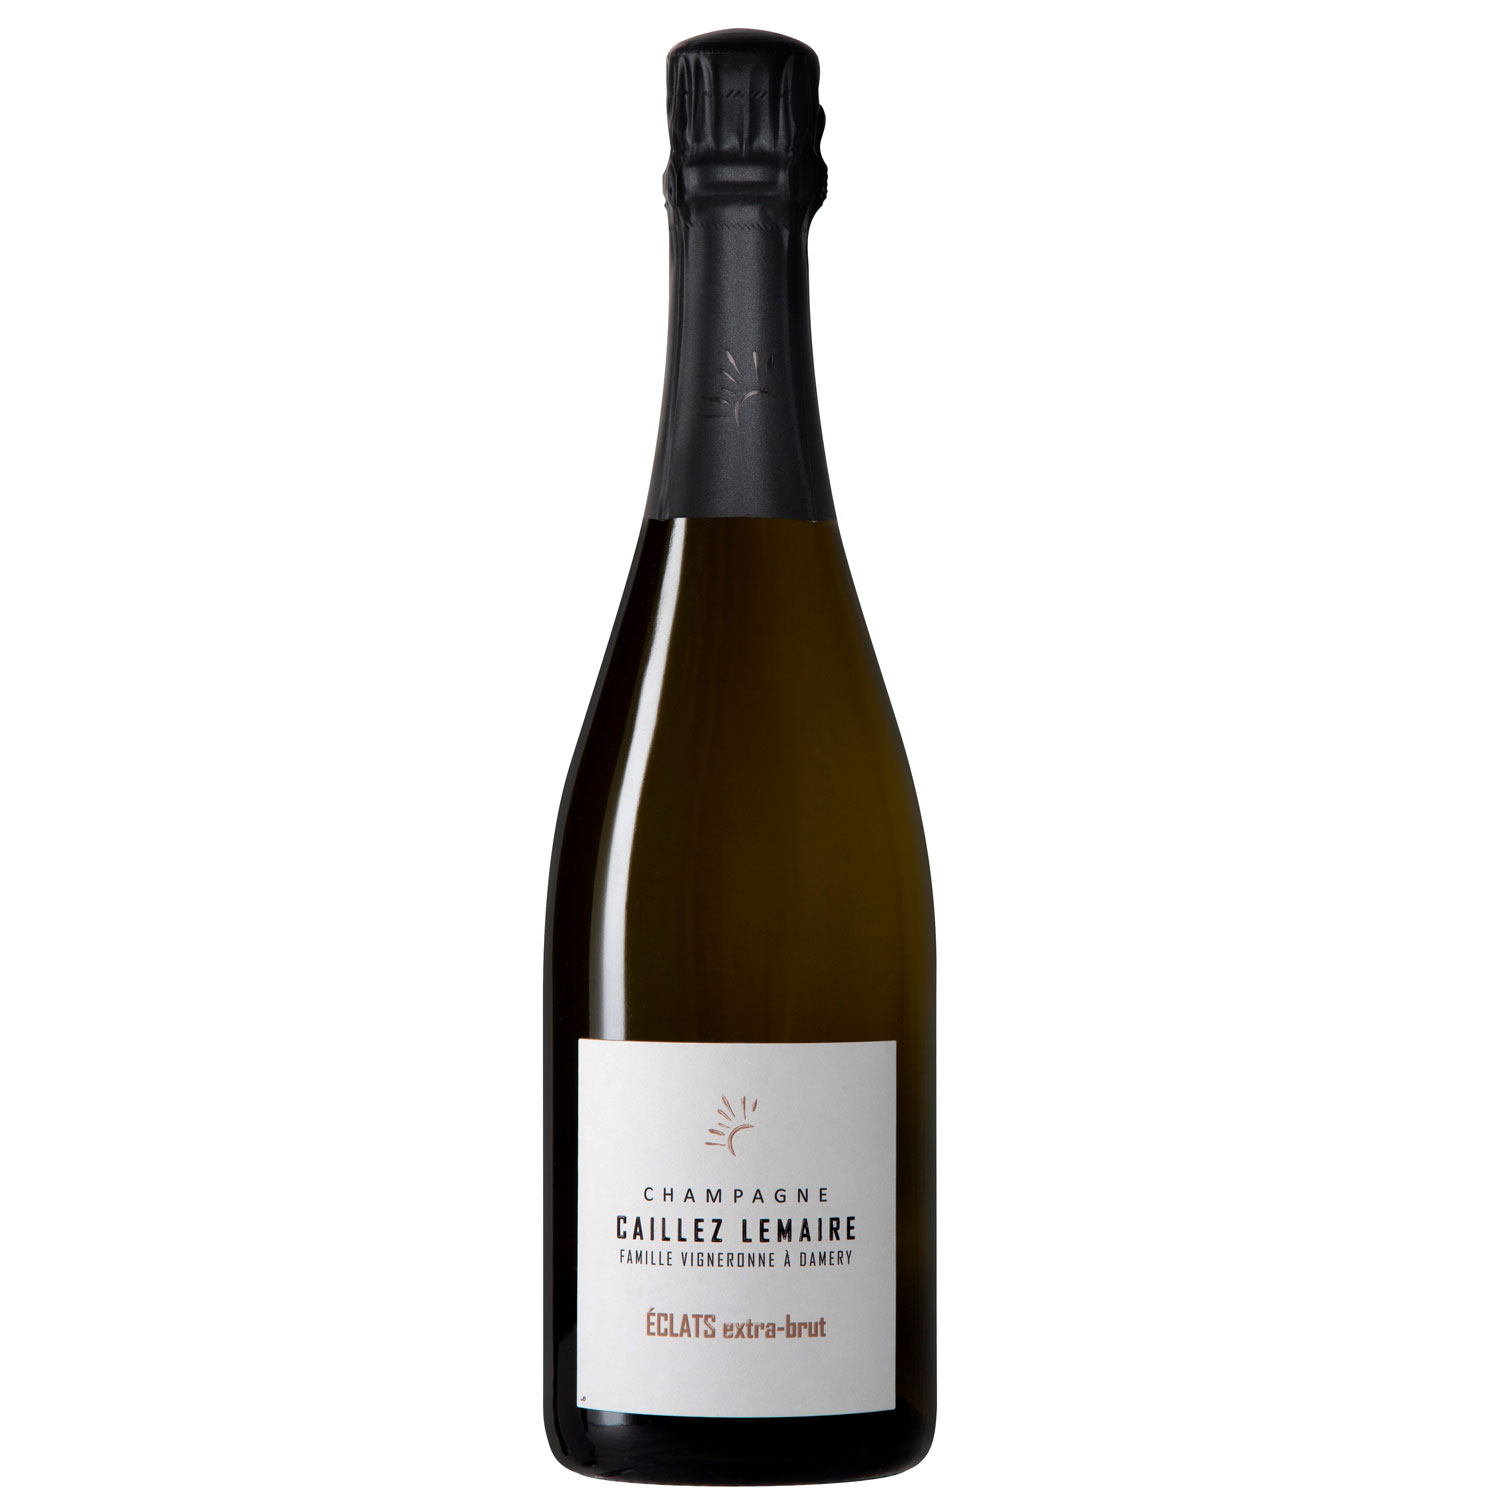 Champagne Caillez-Lemaire: Eclats Extra Brut